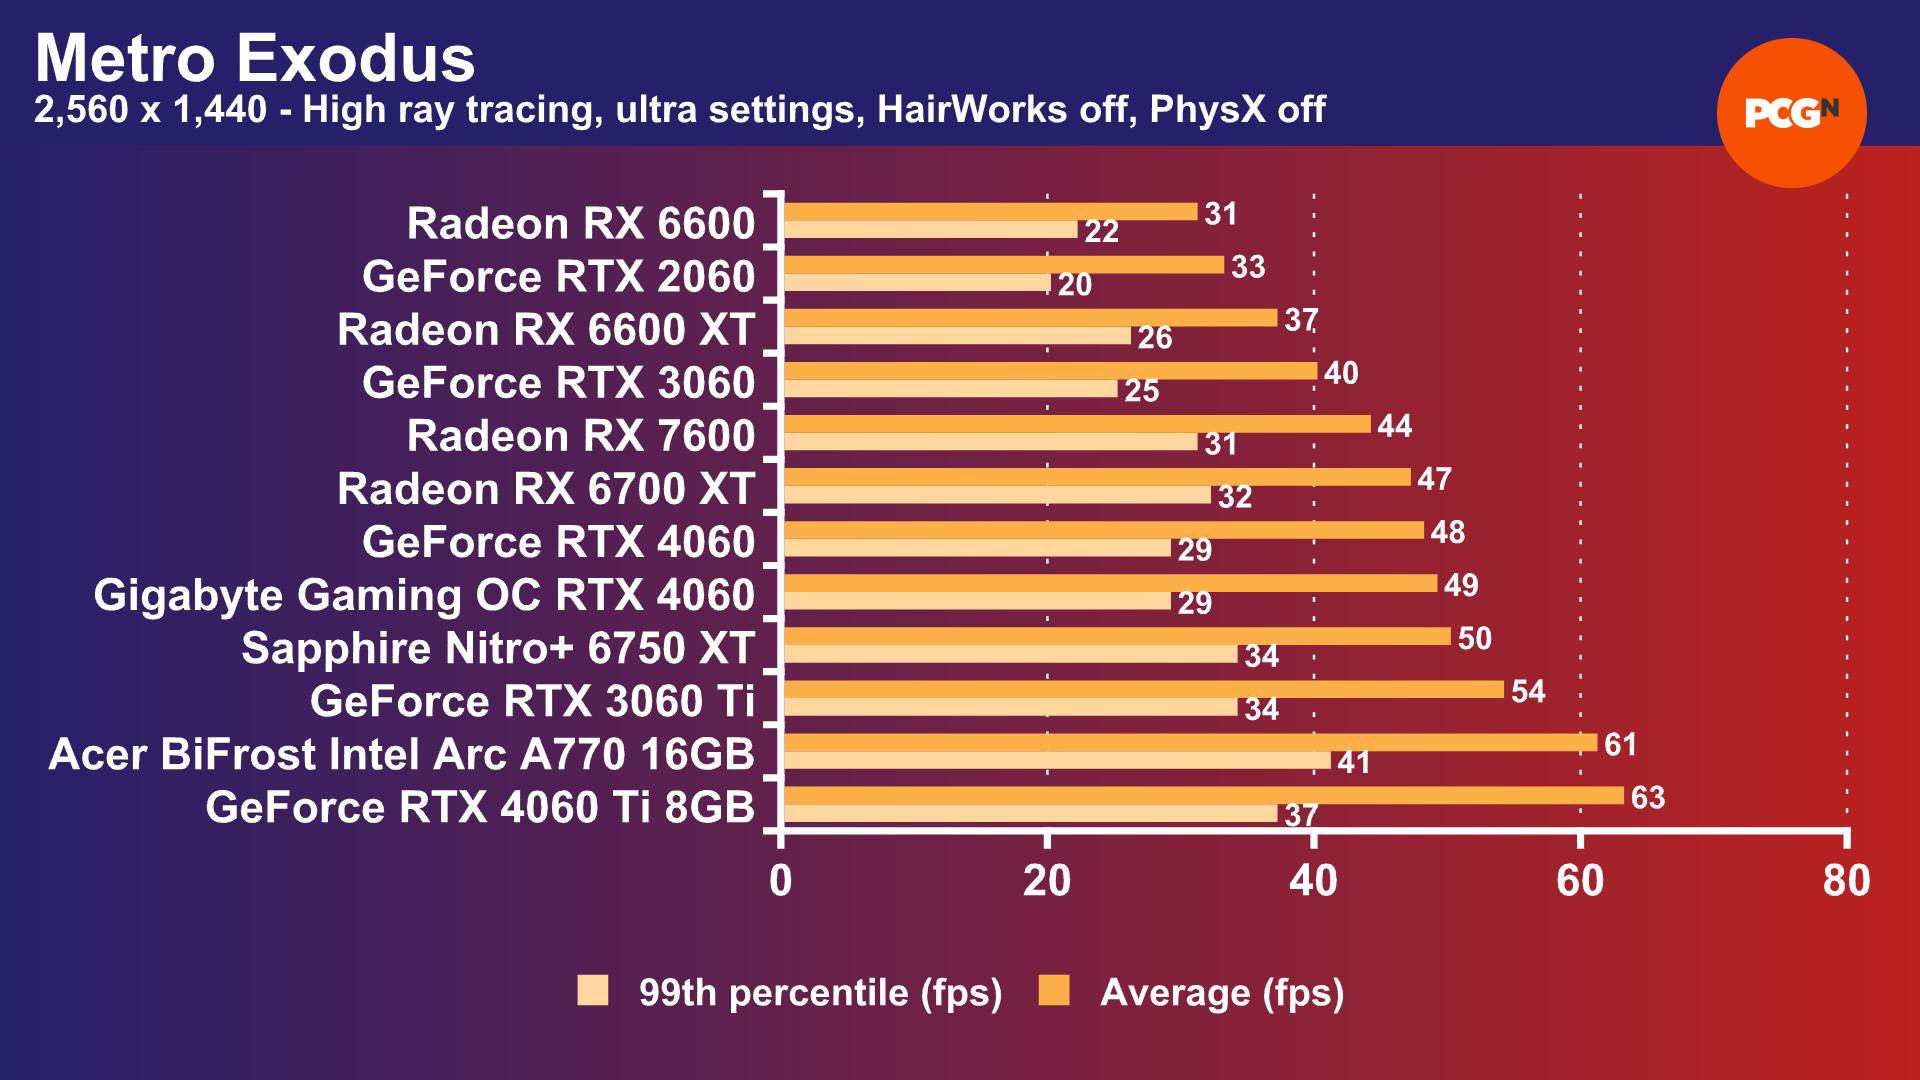 Intel Arc A770 review: Metro Exodus 2,560 x 1,440 ray tracing benchmark results graph